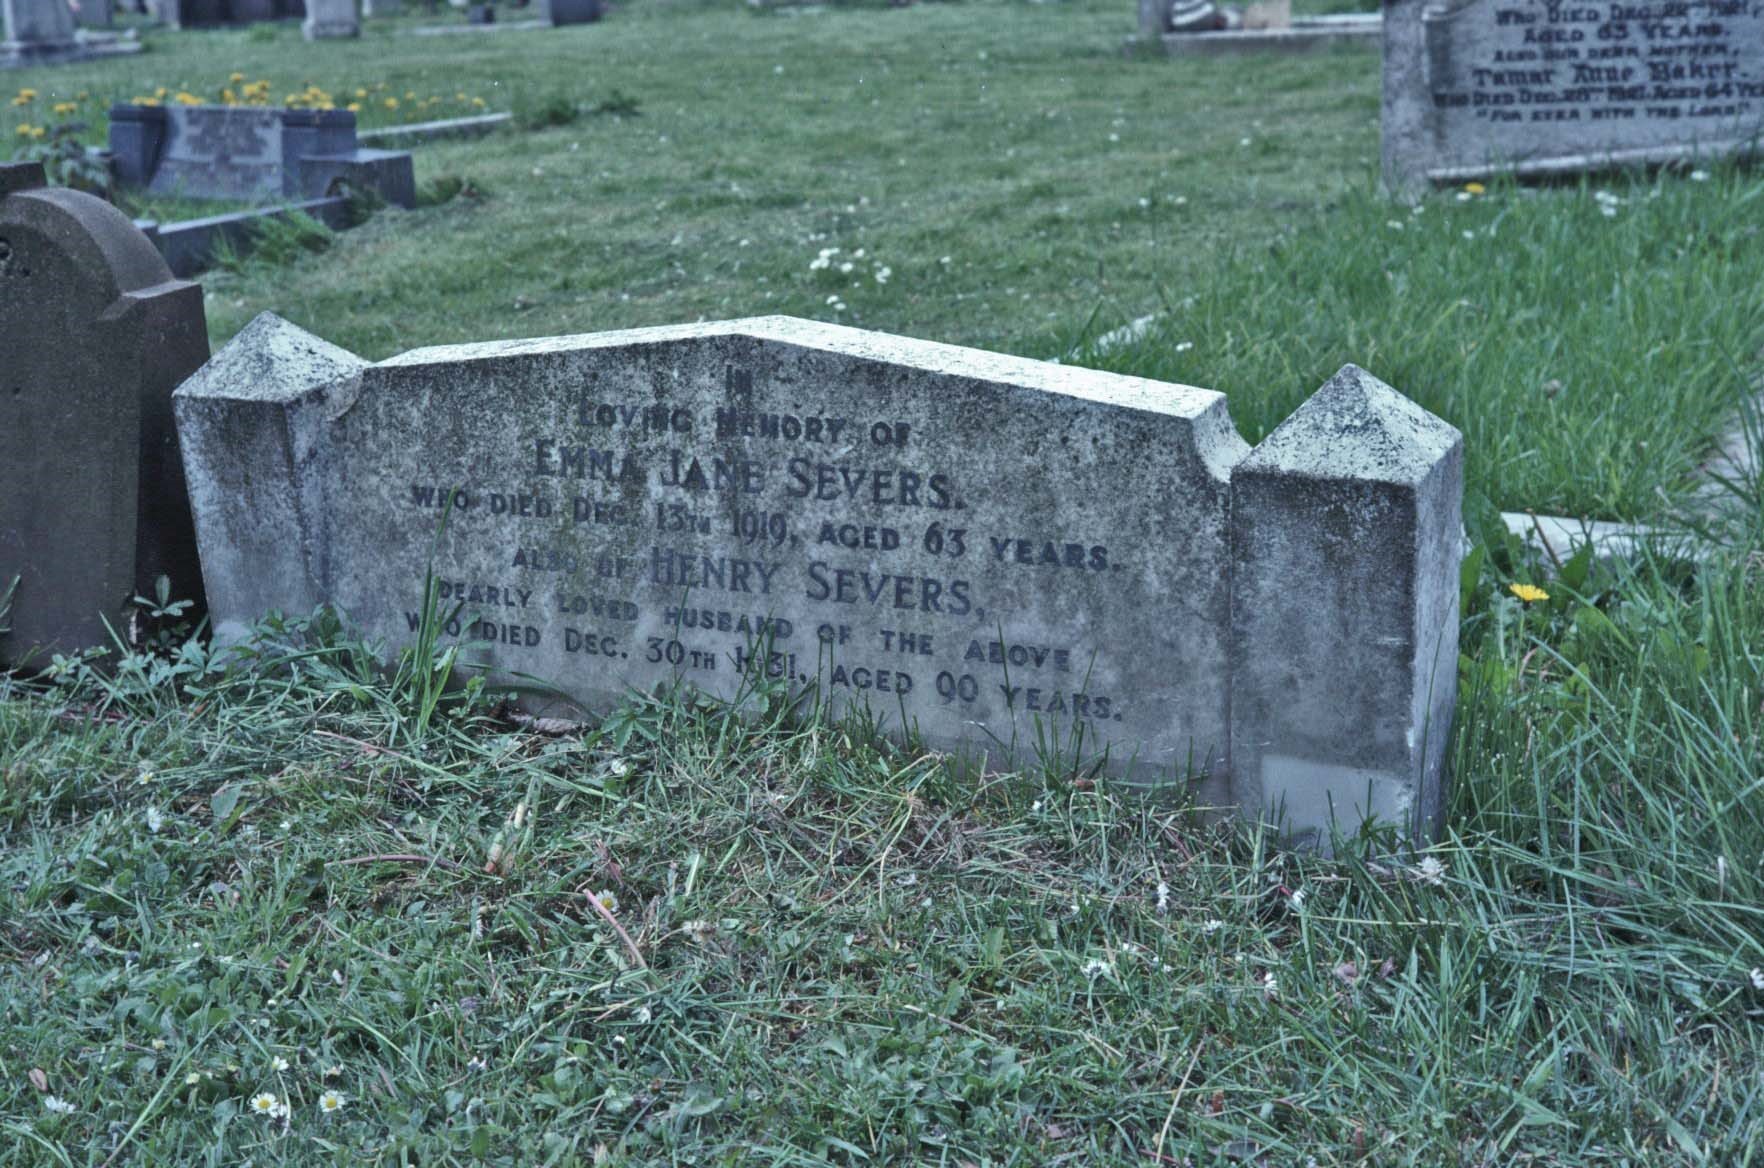 John Severs’ great-grandfather Henry’s grave in Linthorpe Cemetery in Middlesbrough